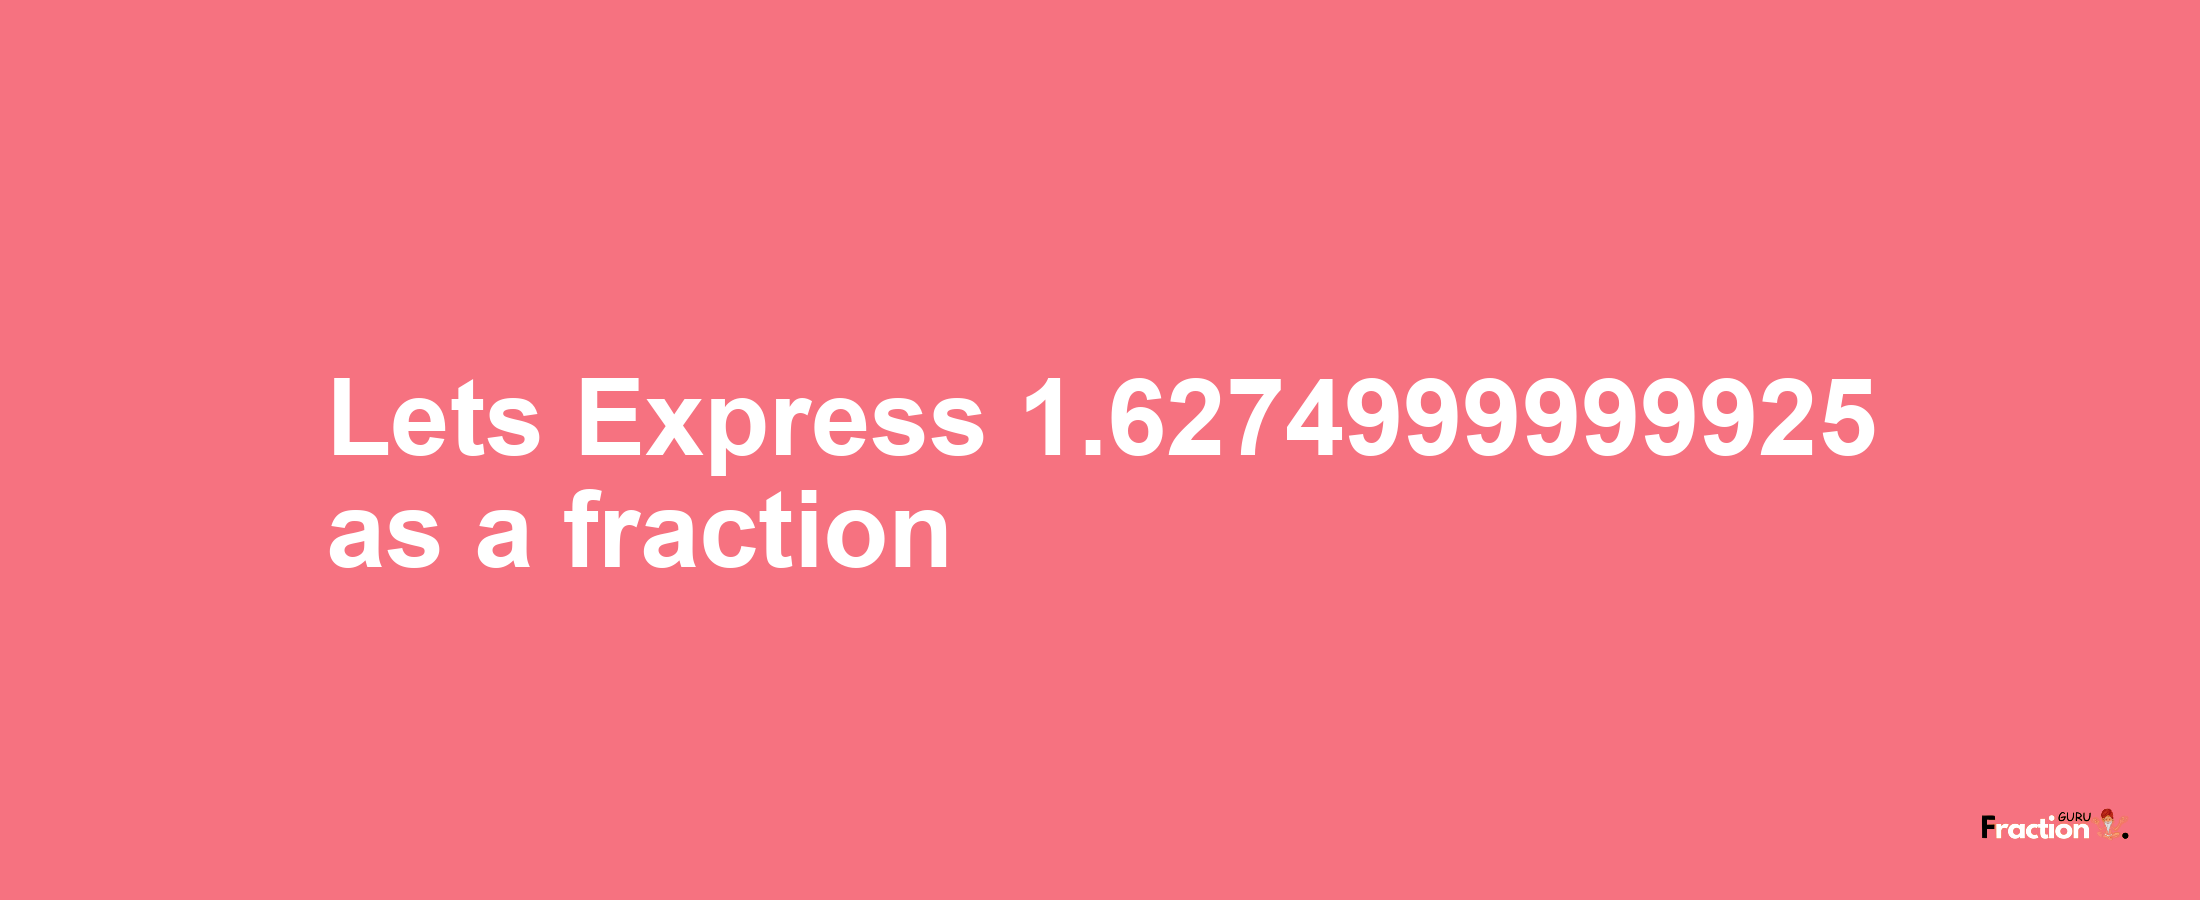 Lets Express 1.6274999999925 as afraction